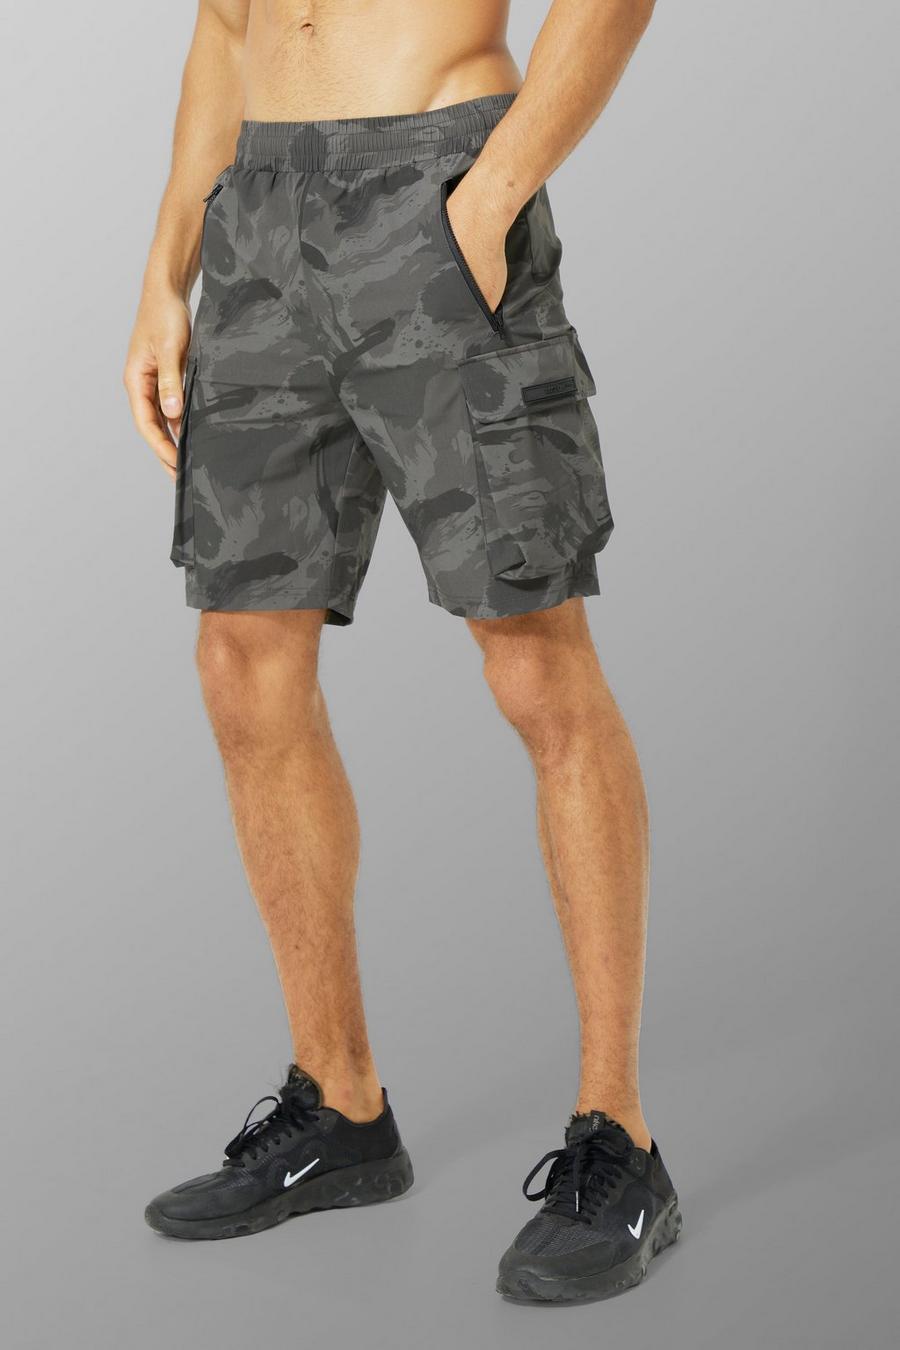 BoohooMAN Denim Loose Fit Spliced Camo Cargo Shorts in Green for Men Womens Clothing Shorts Cargo shorts 